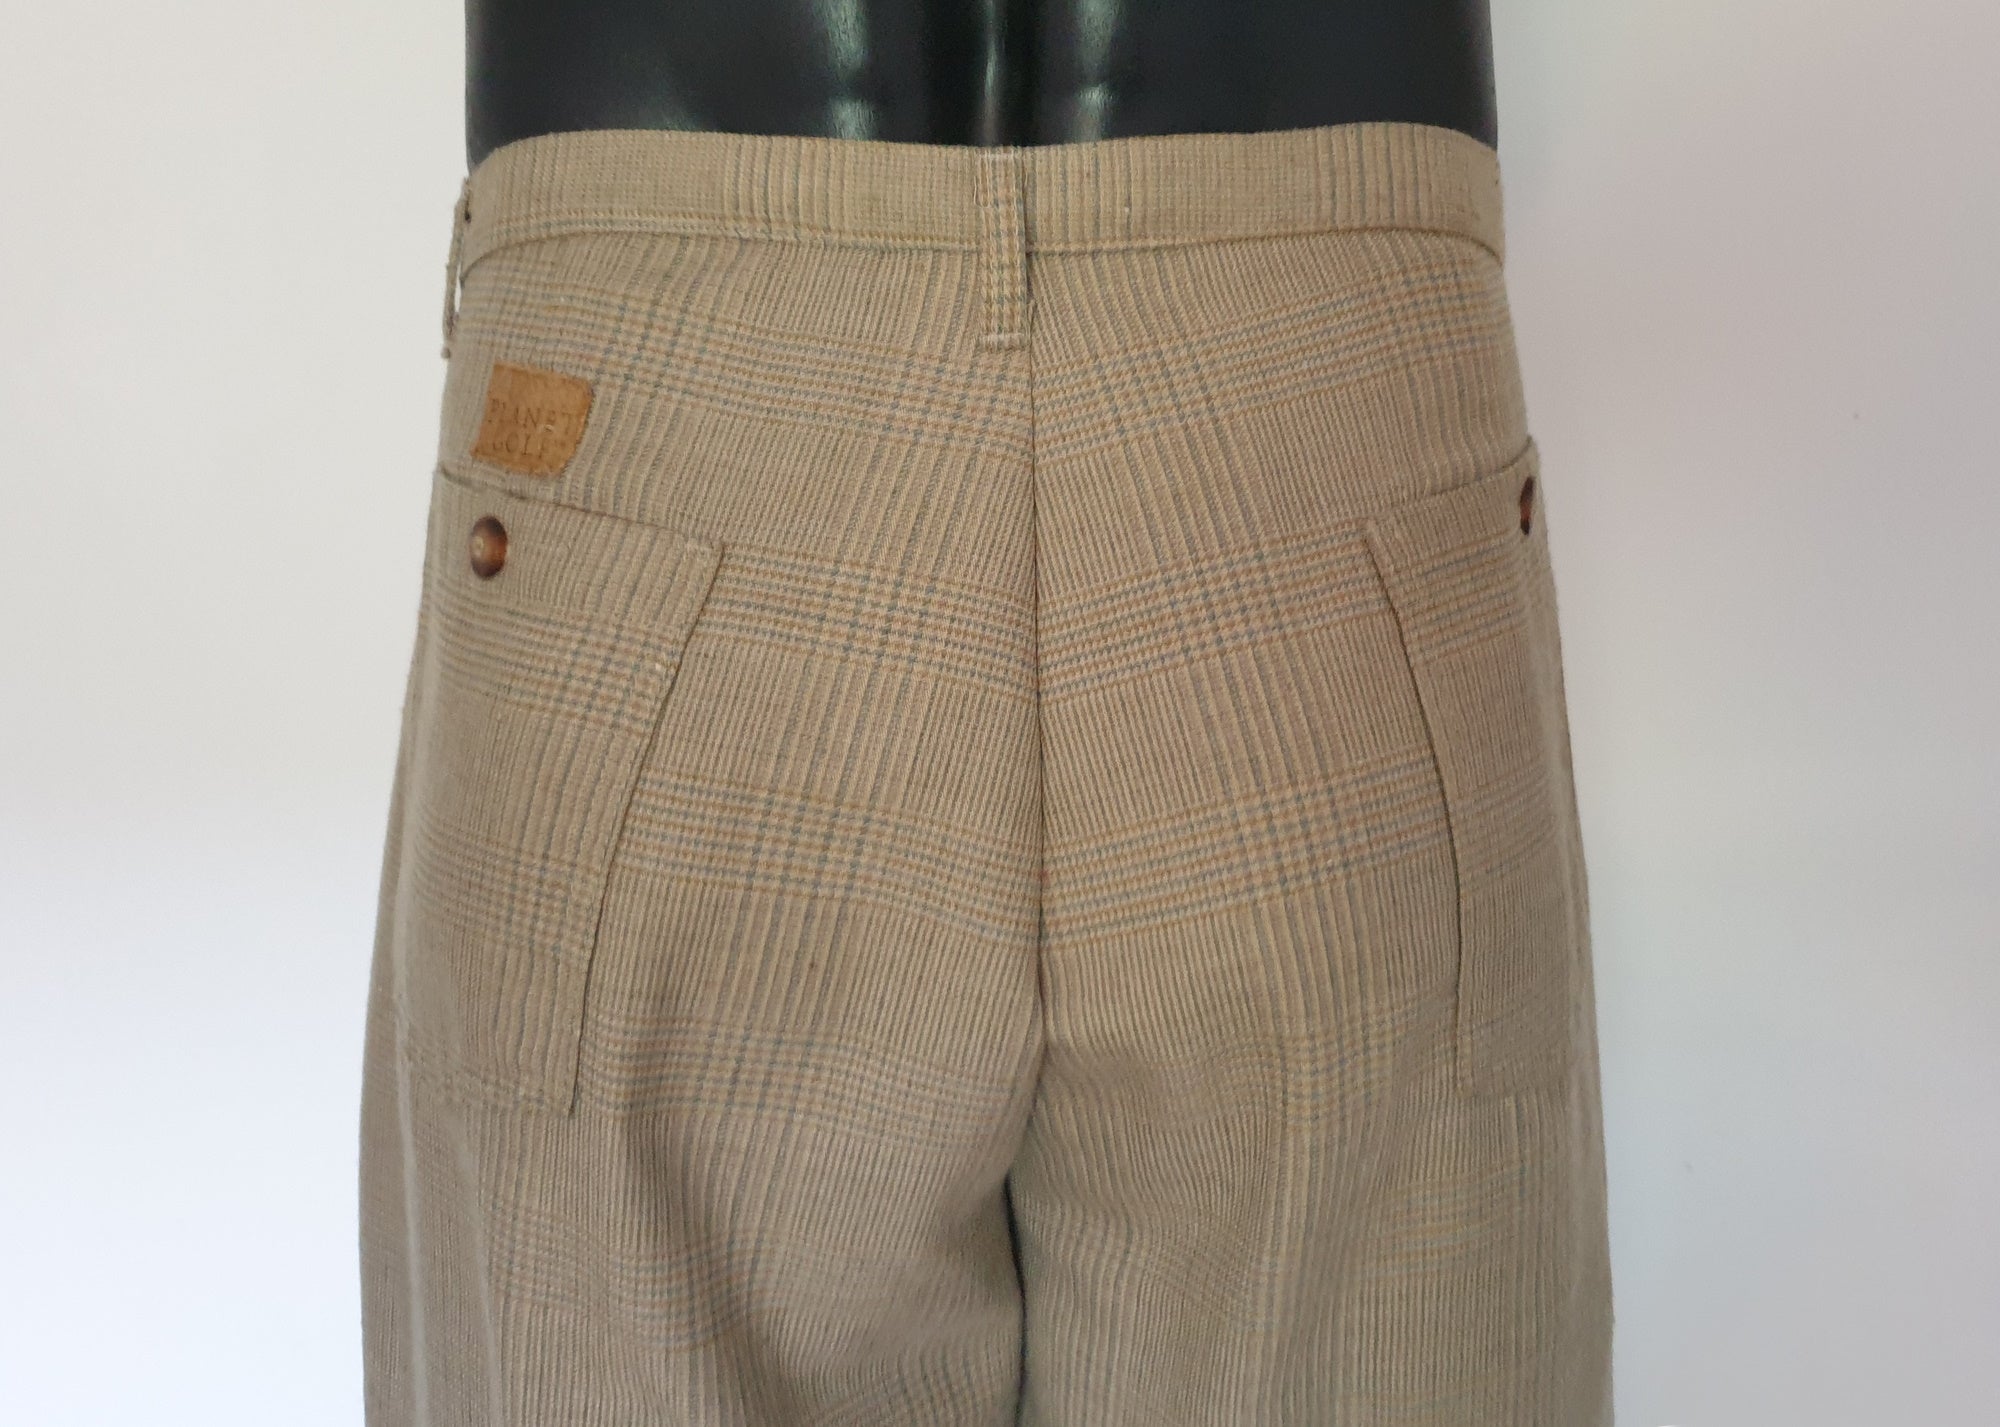 1980s vintage beige check golf pants by planet golf extra large